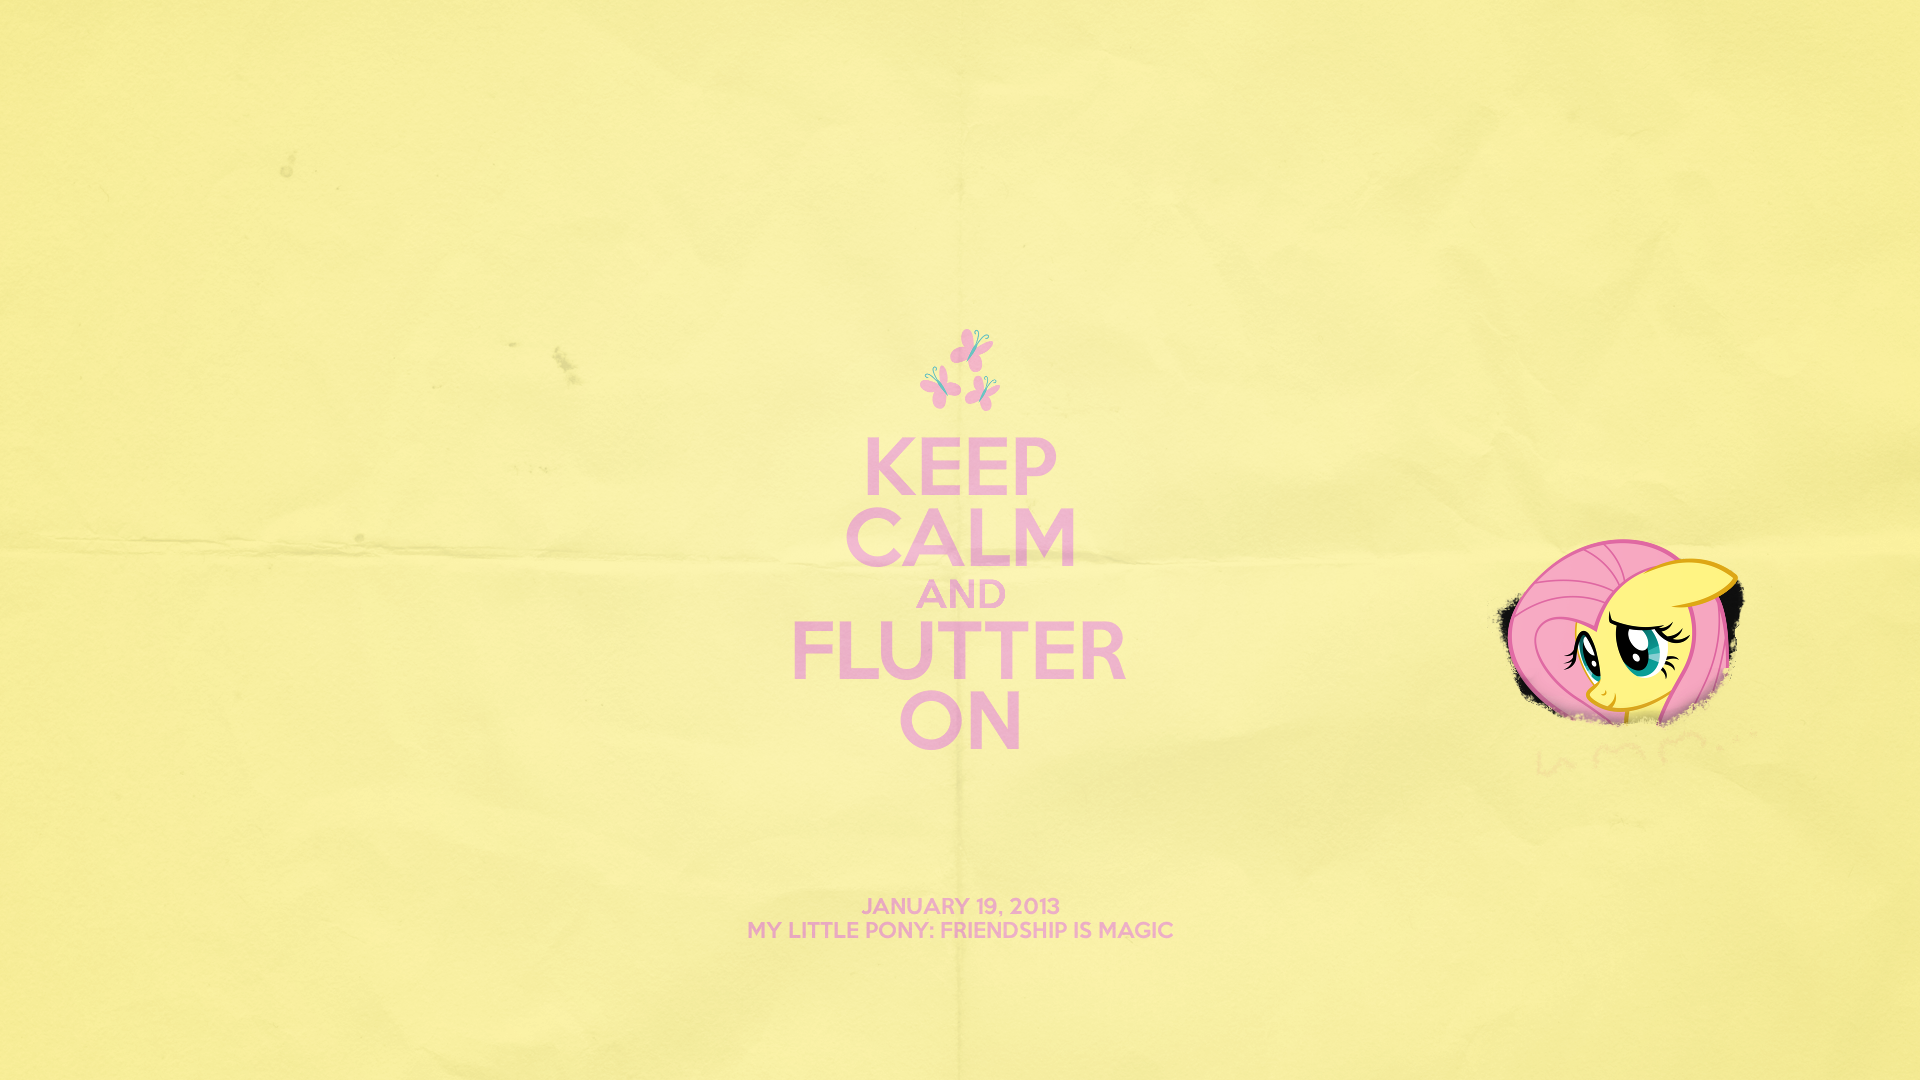 Keep Calm and Flutter On by BlackGryph0n, Dharthez, impala99 and SPikEtheSWeDe